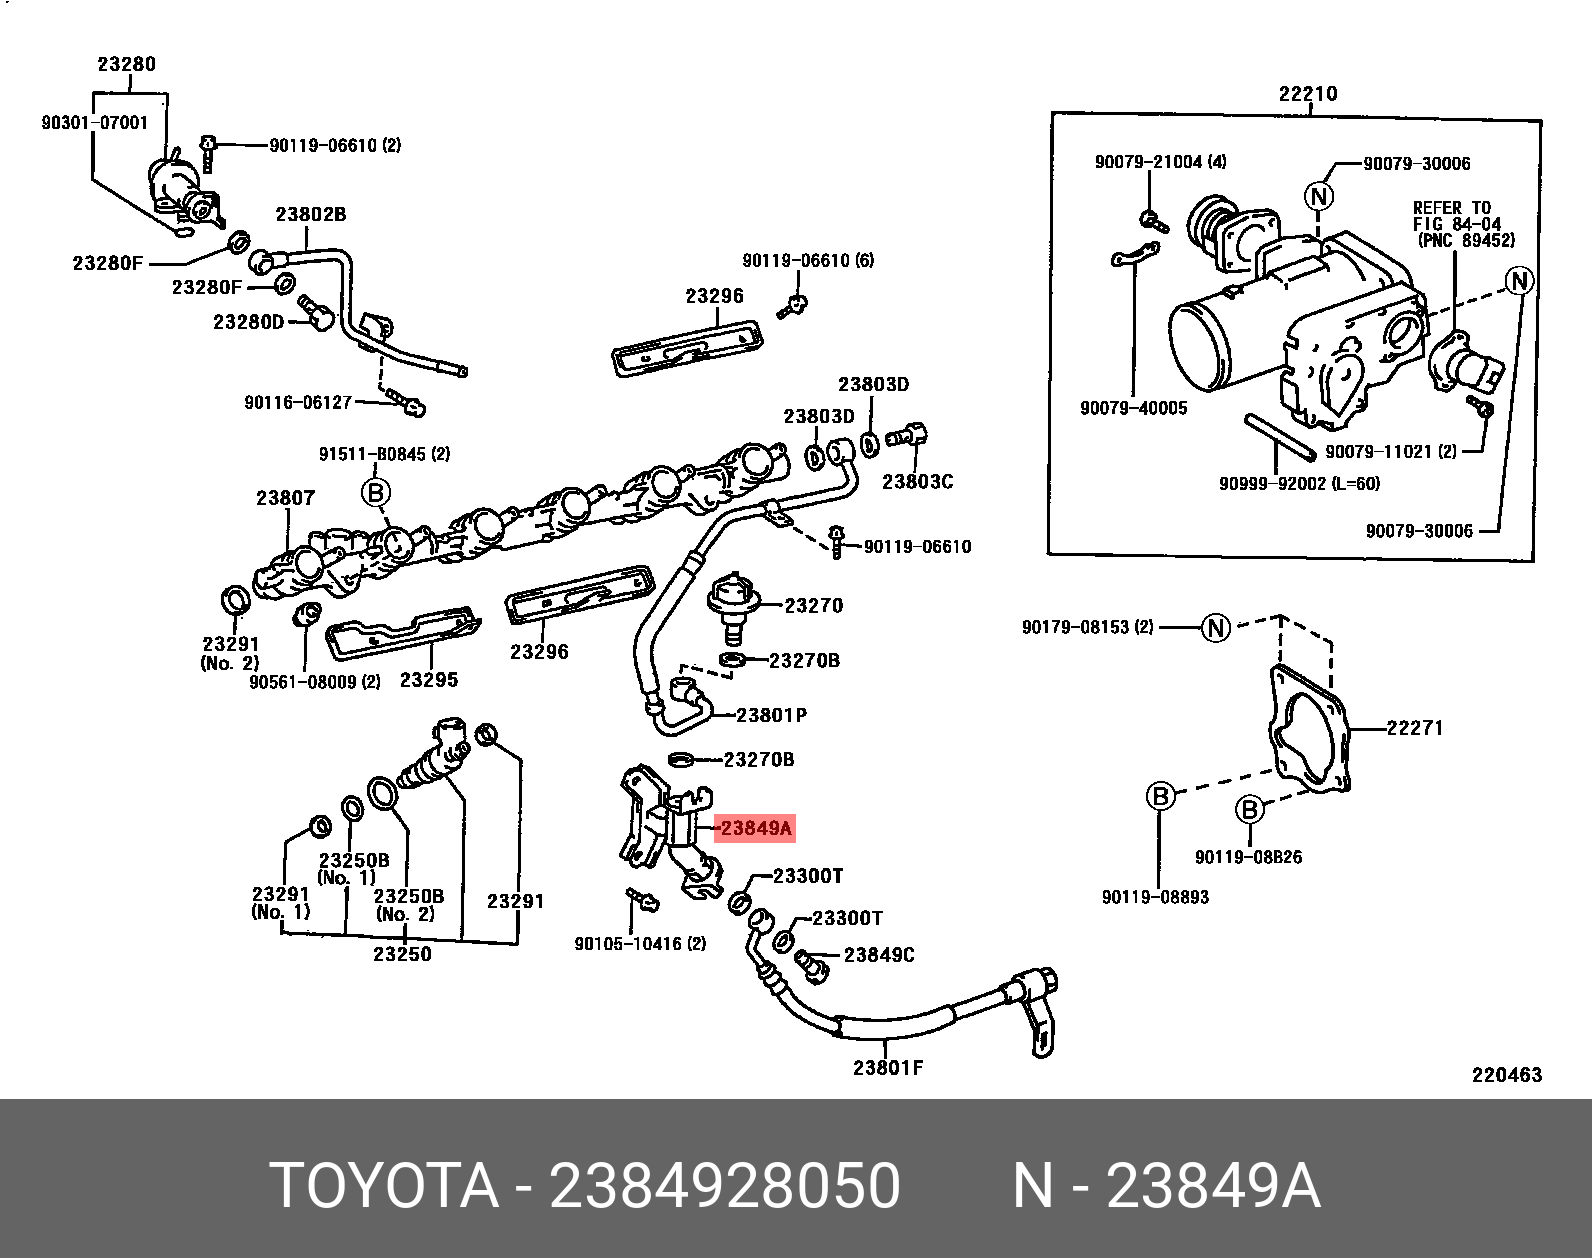 CAMRY 200601 - 201108, SUPPORT, FUEL PIPE